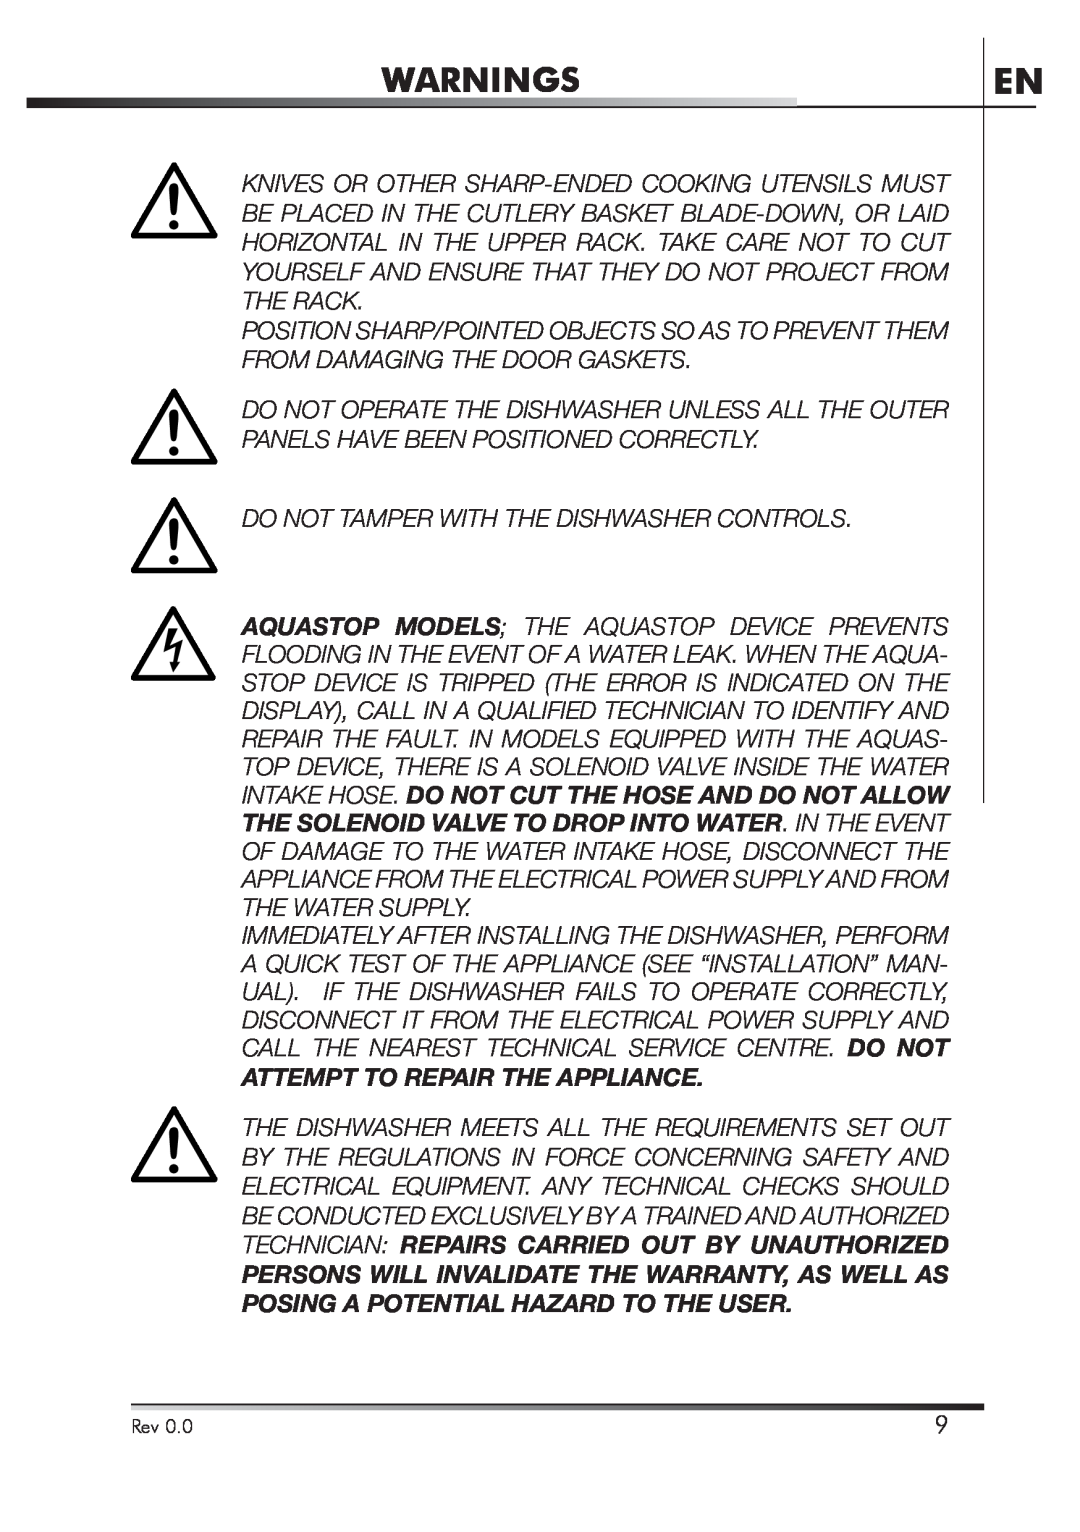 Smeg STA4645 instruction manual Warnings, Attempt To Repair The Appliance 